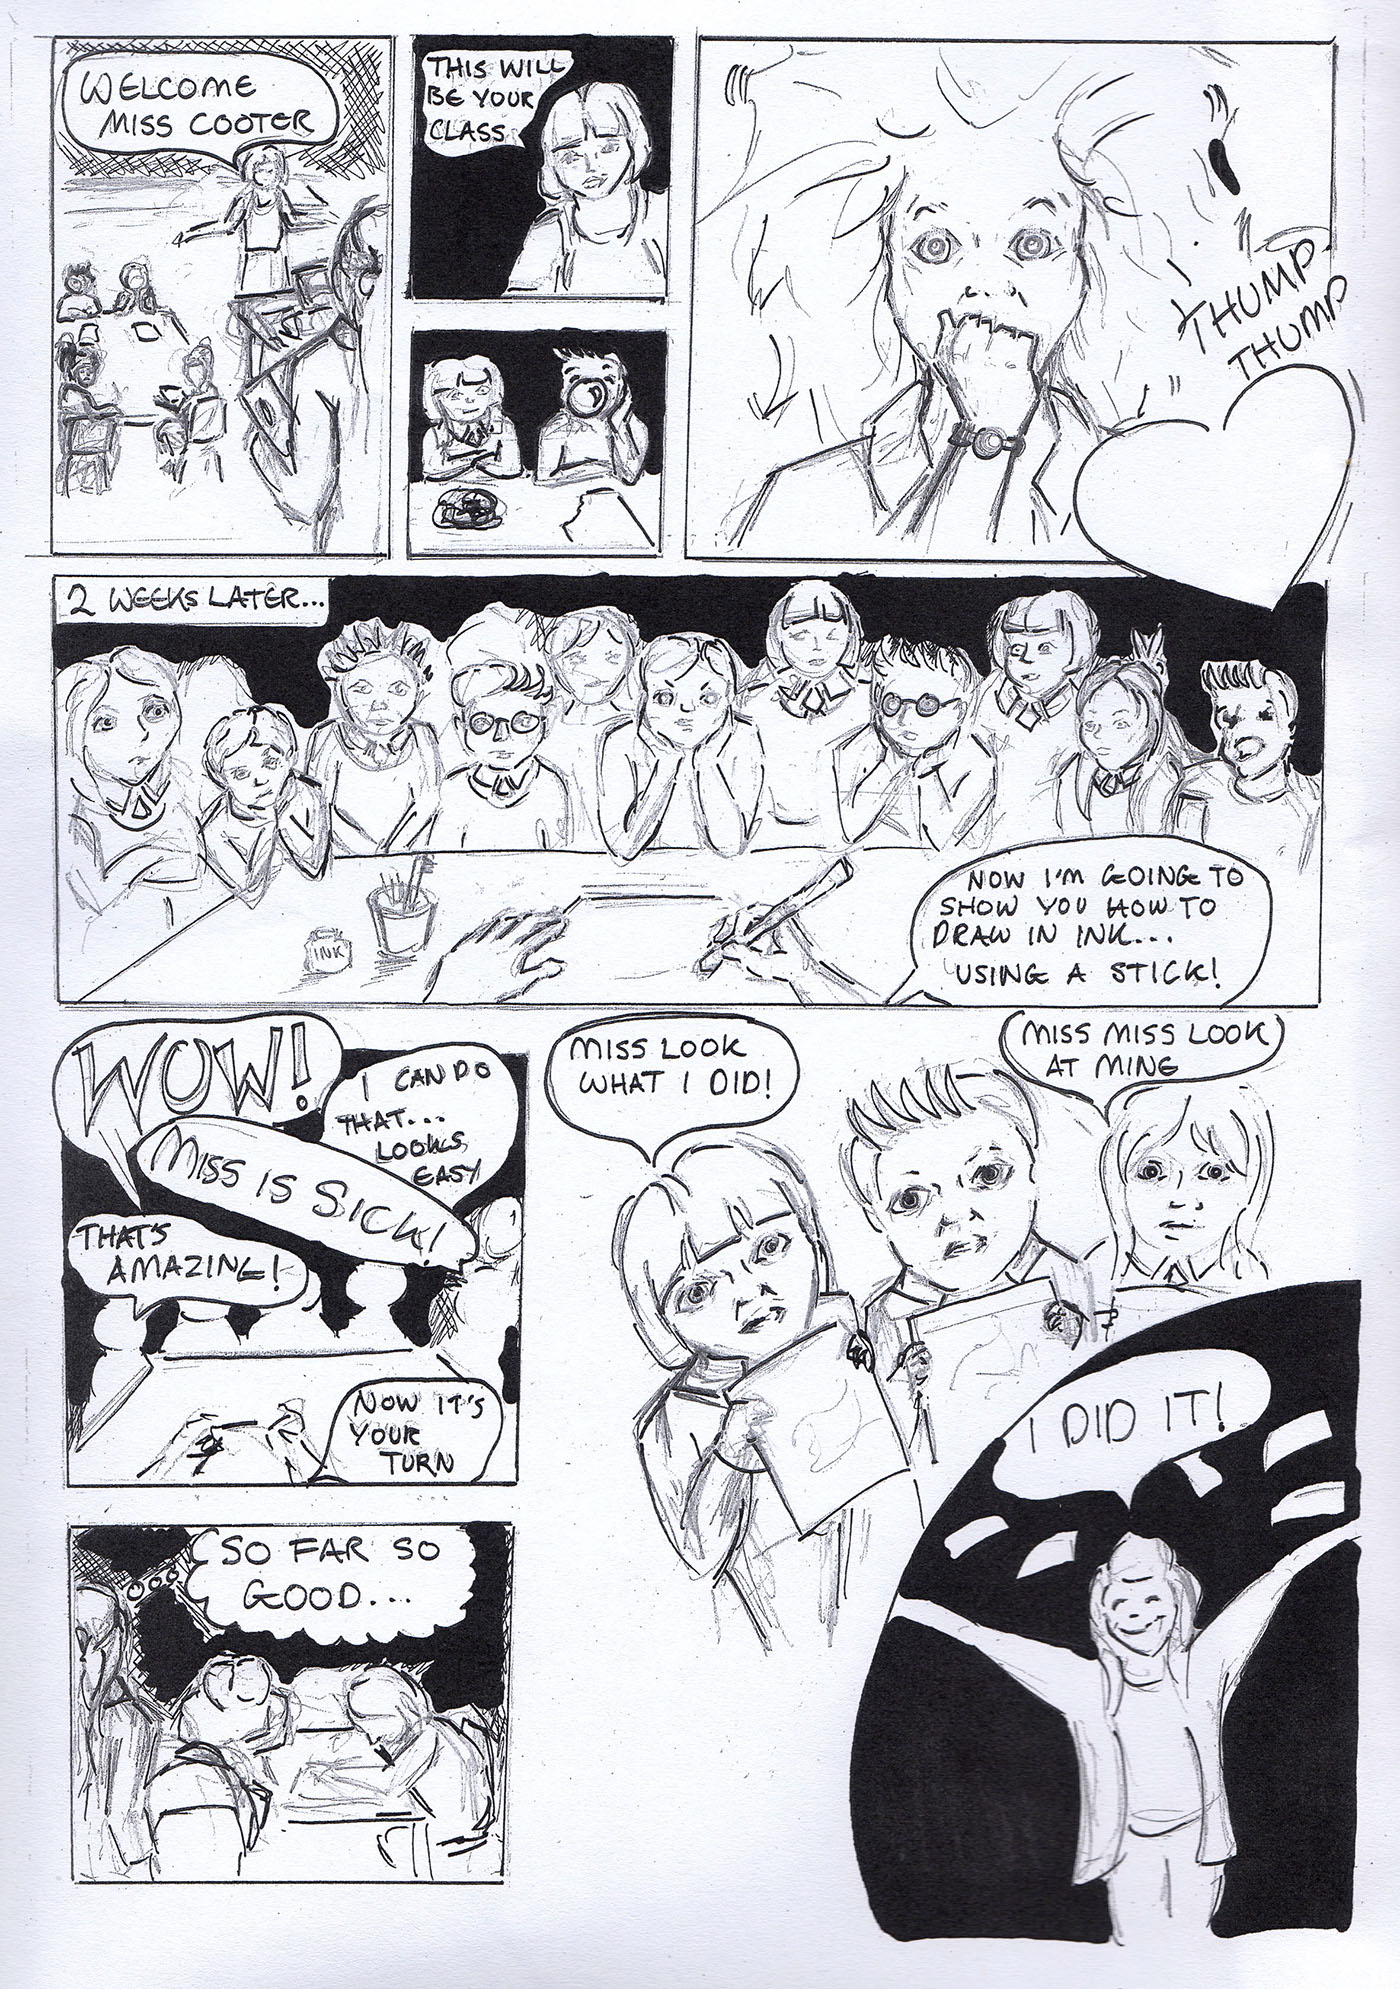 comicbook teacher Education school sequence learning demonstration sketching new Cartooning 